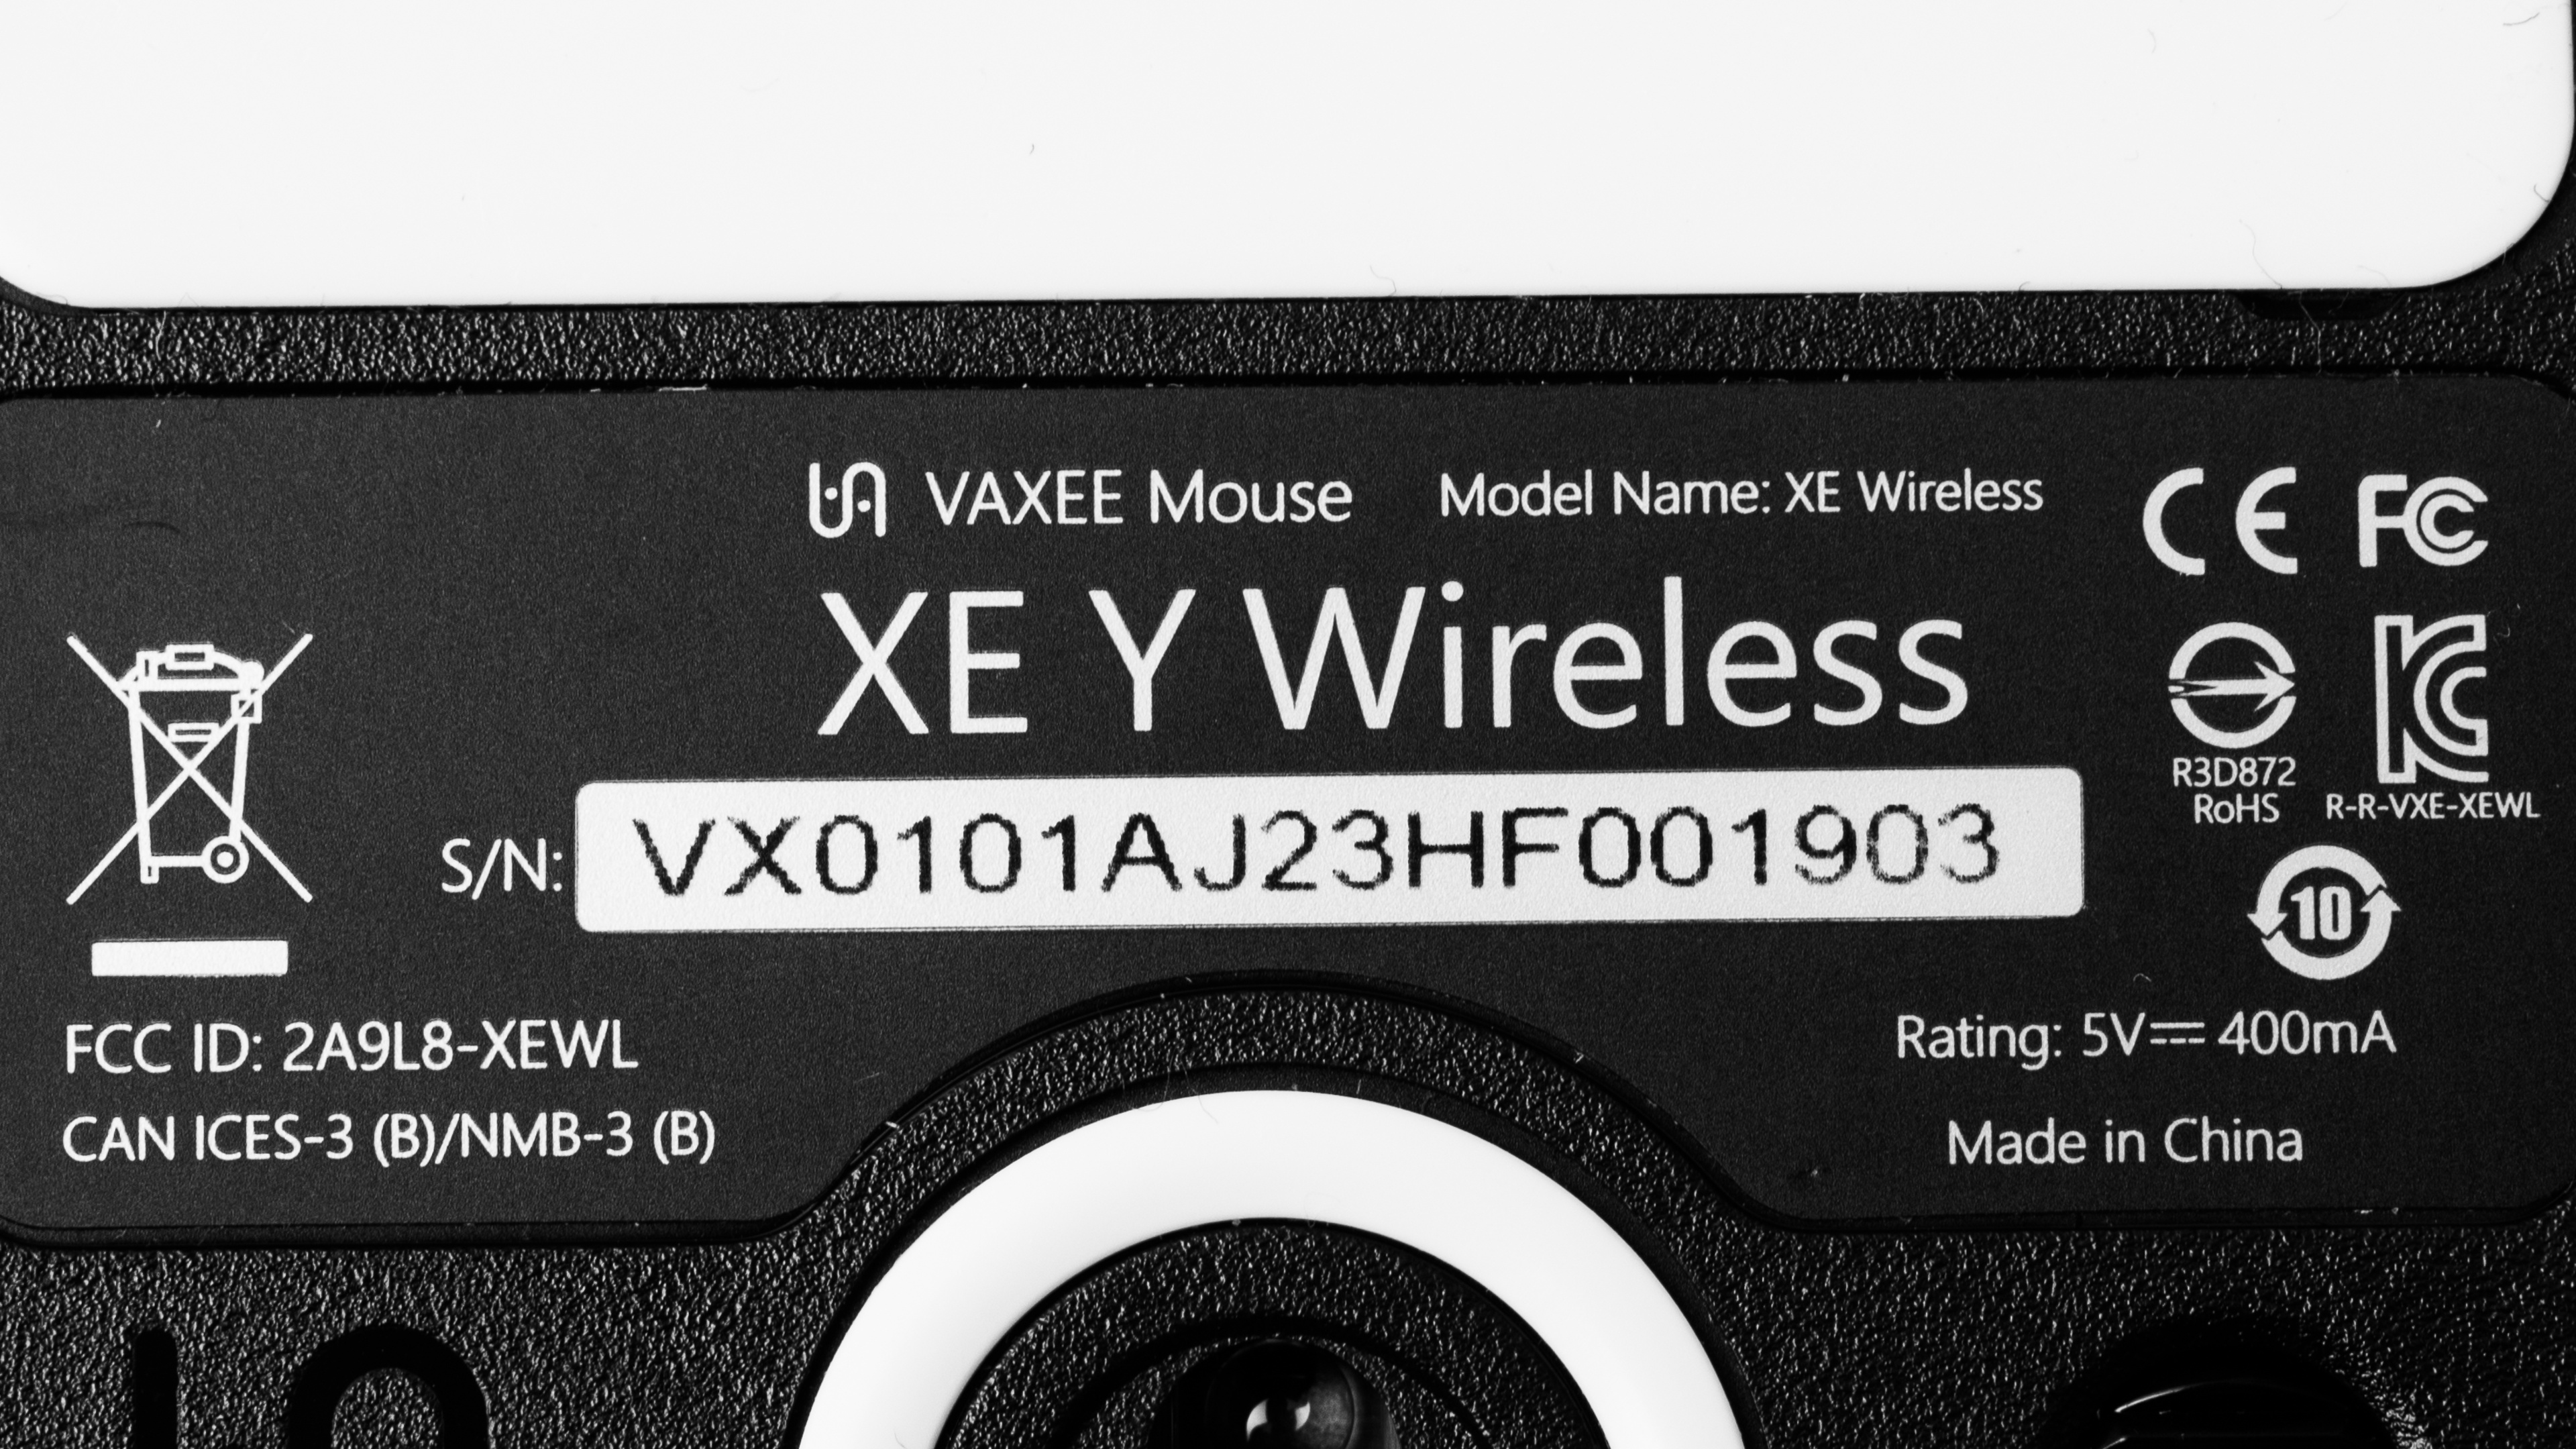 Vaxee XE Wireless Review - RTINGS.com